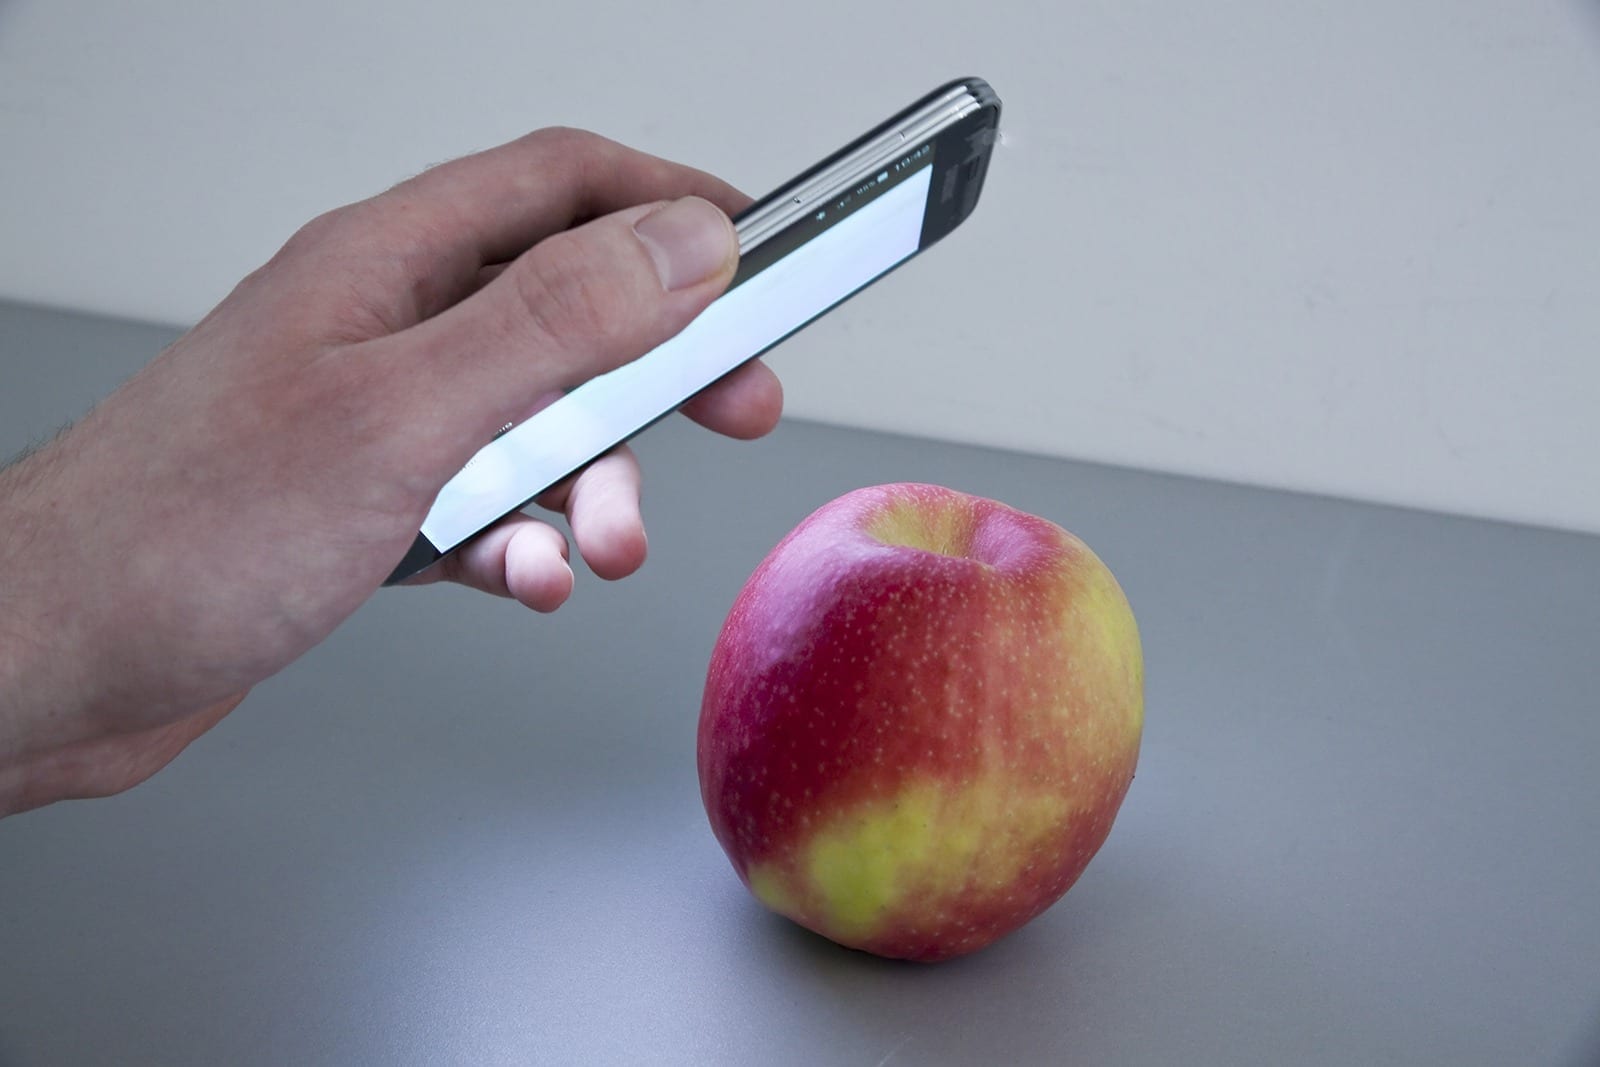 New app using an ordinary smartphone can tell if an apple has been treated with pesticides and more